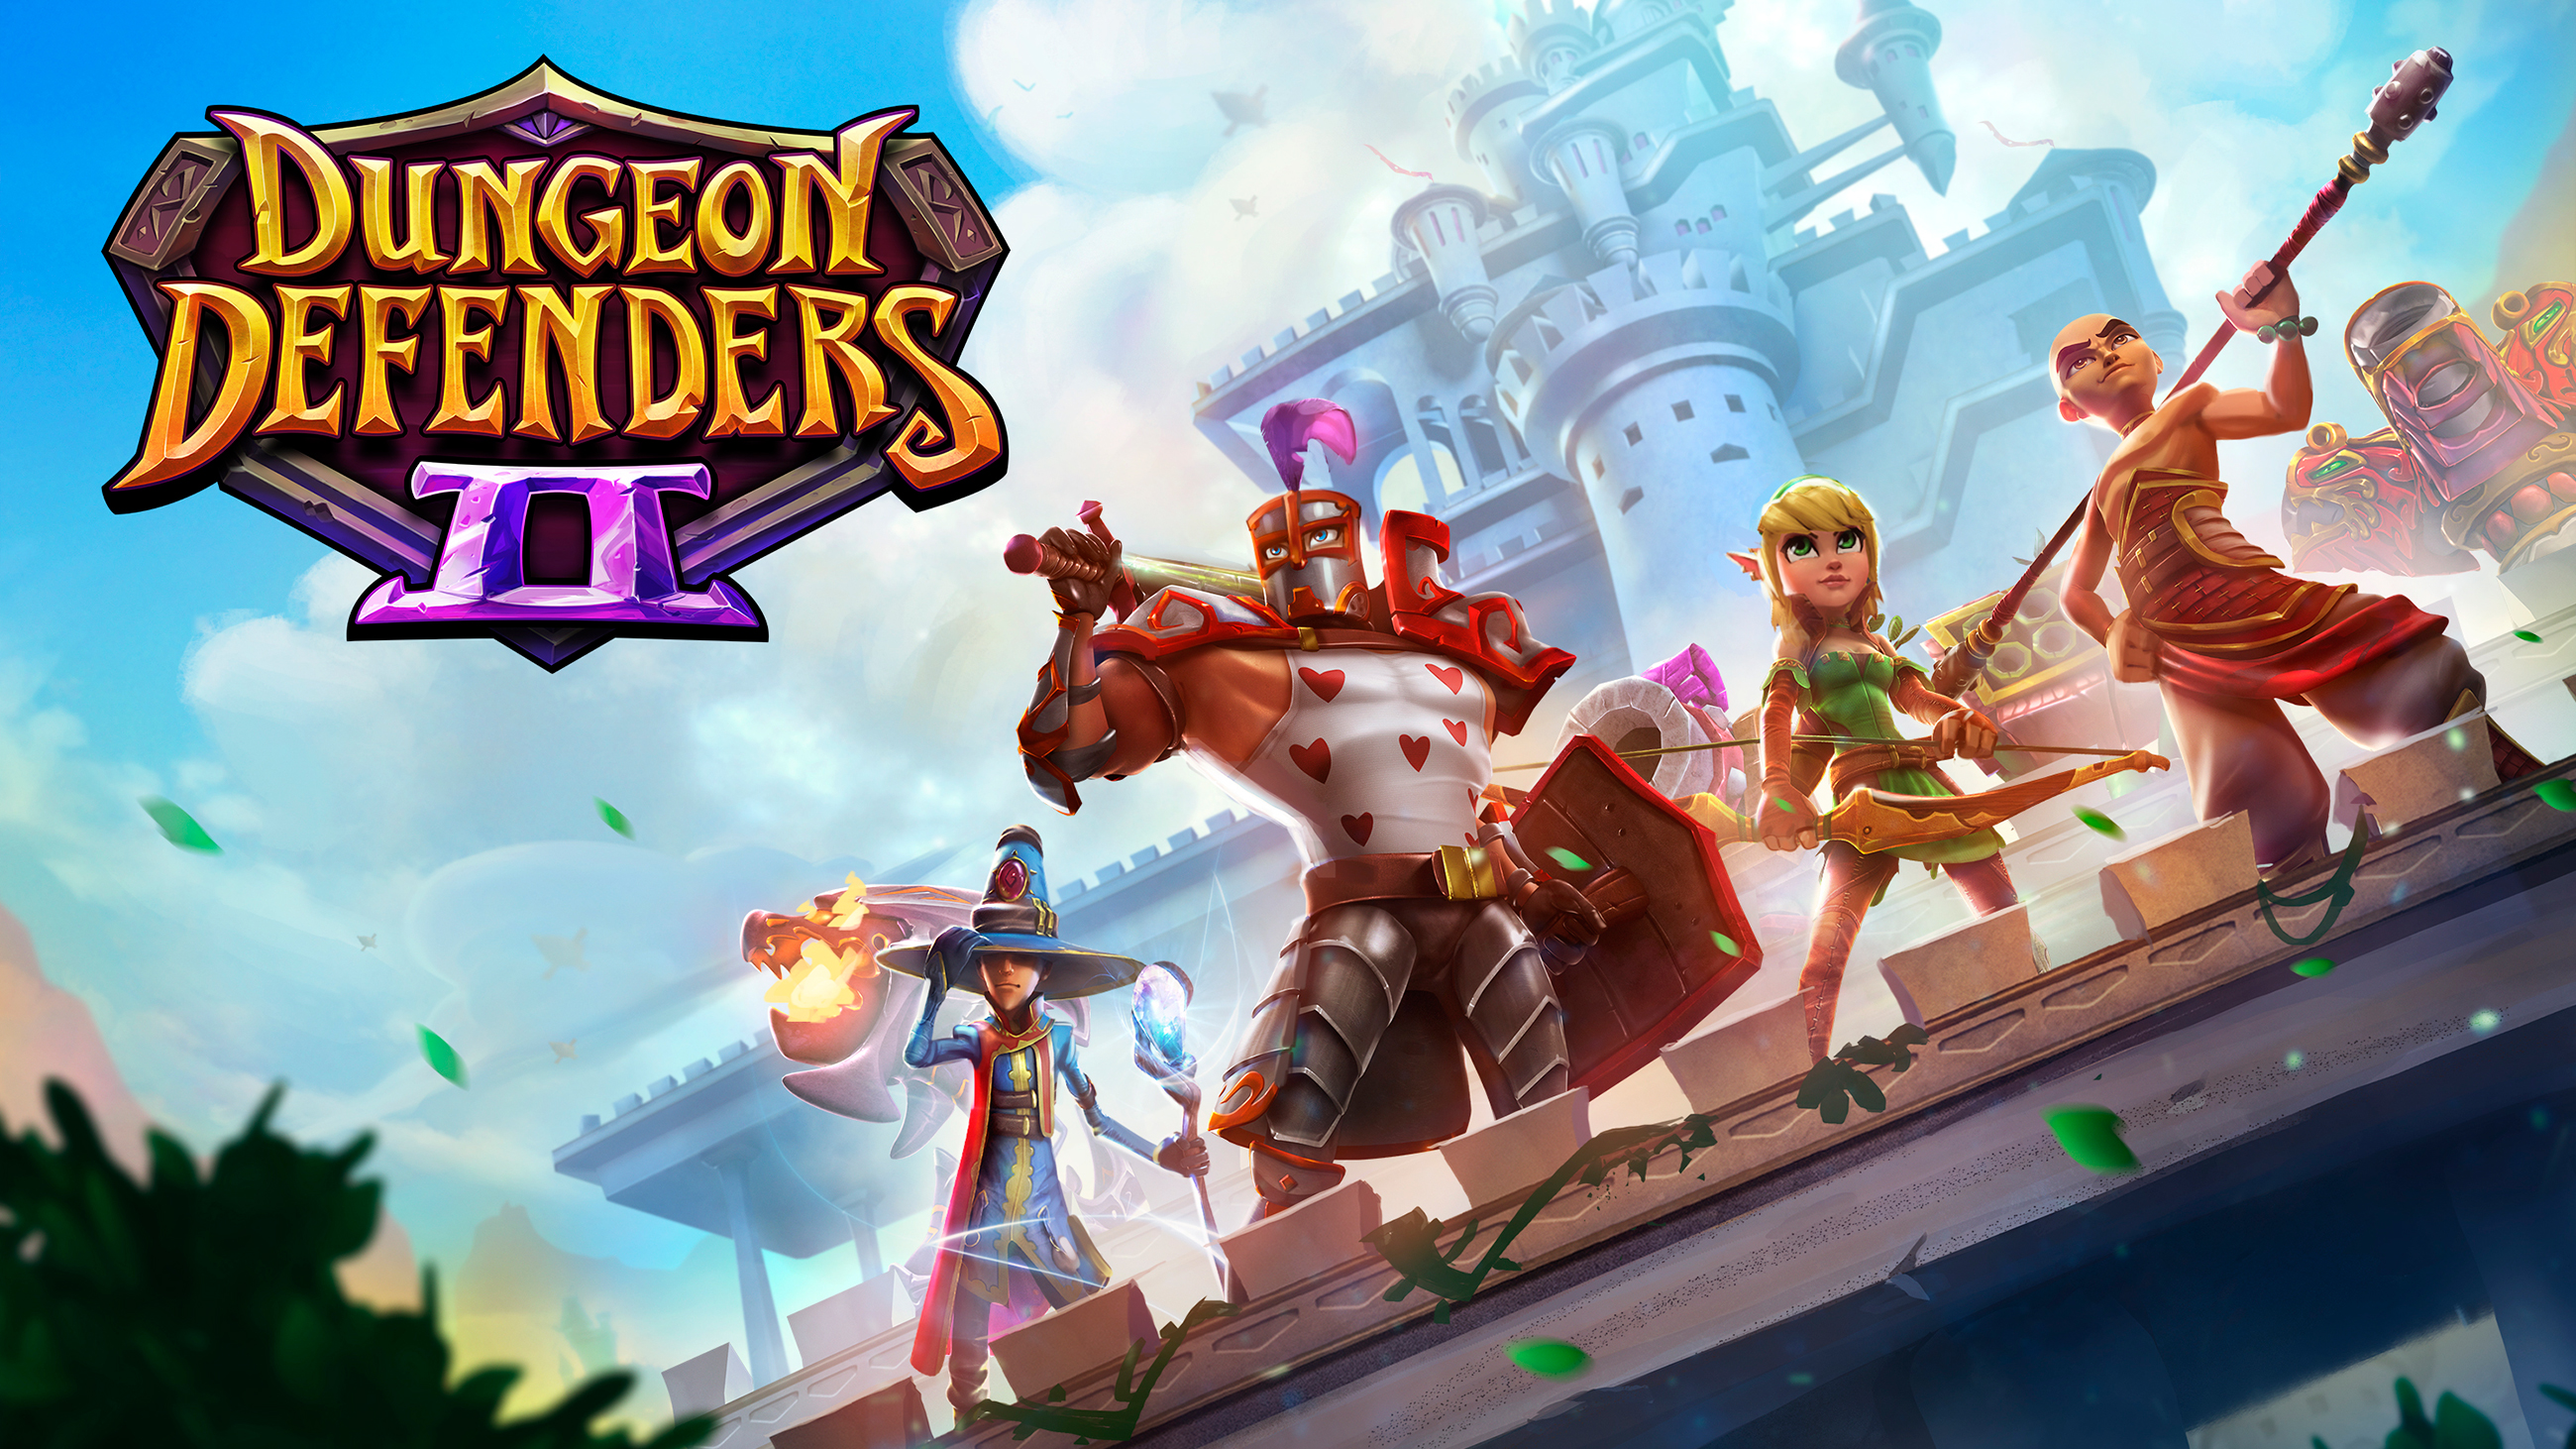 action-tower-defense-rpg-dungeon-defenders-ii-to-release-this-month